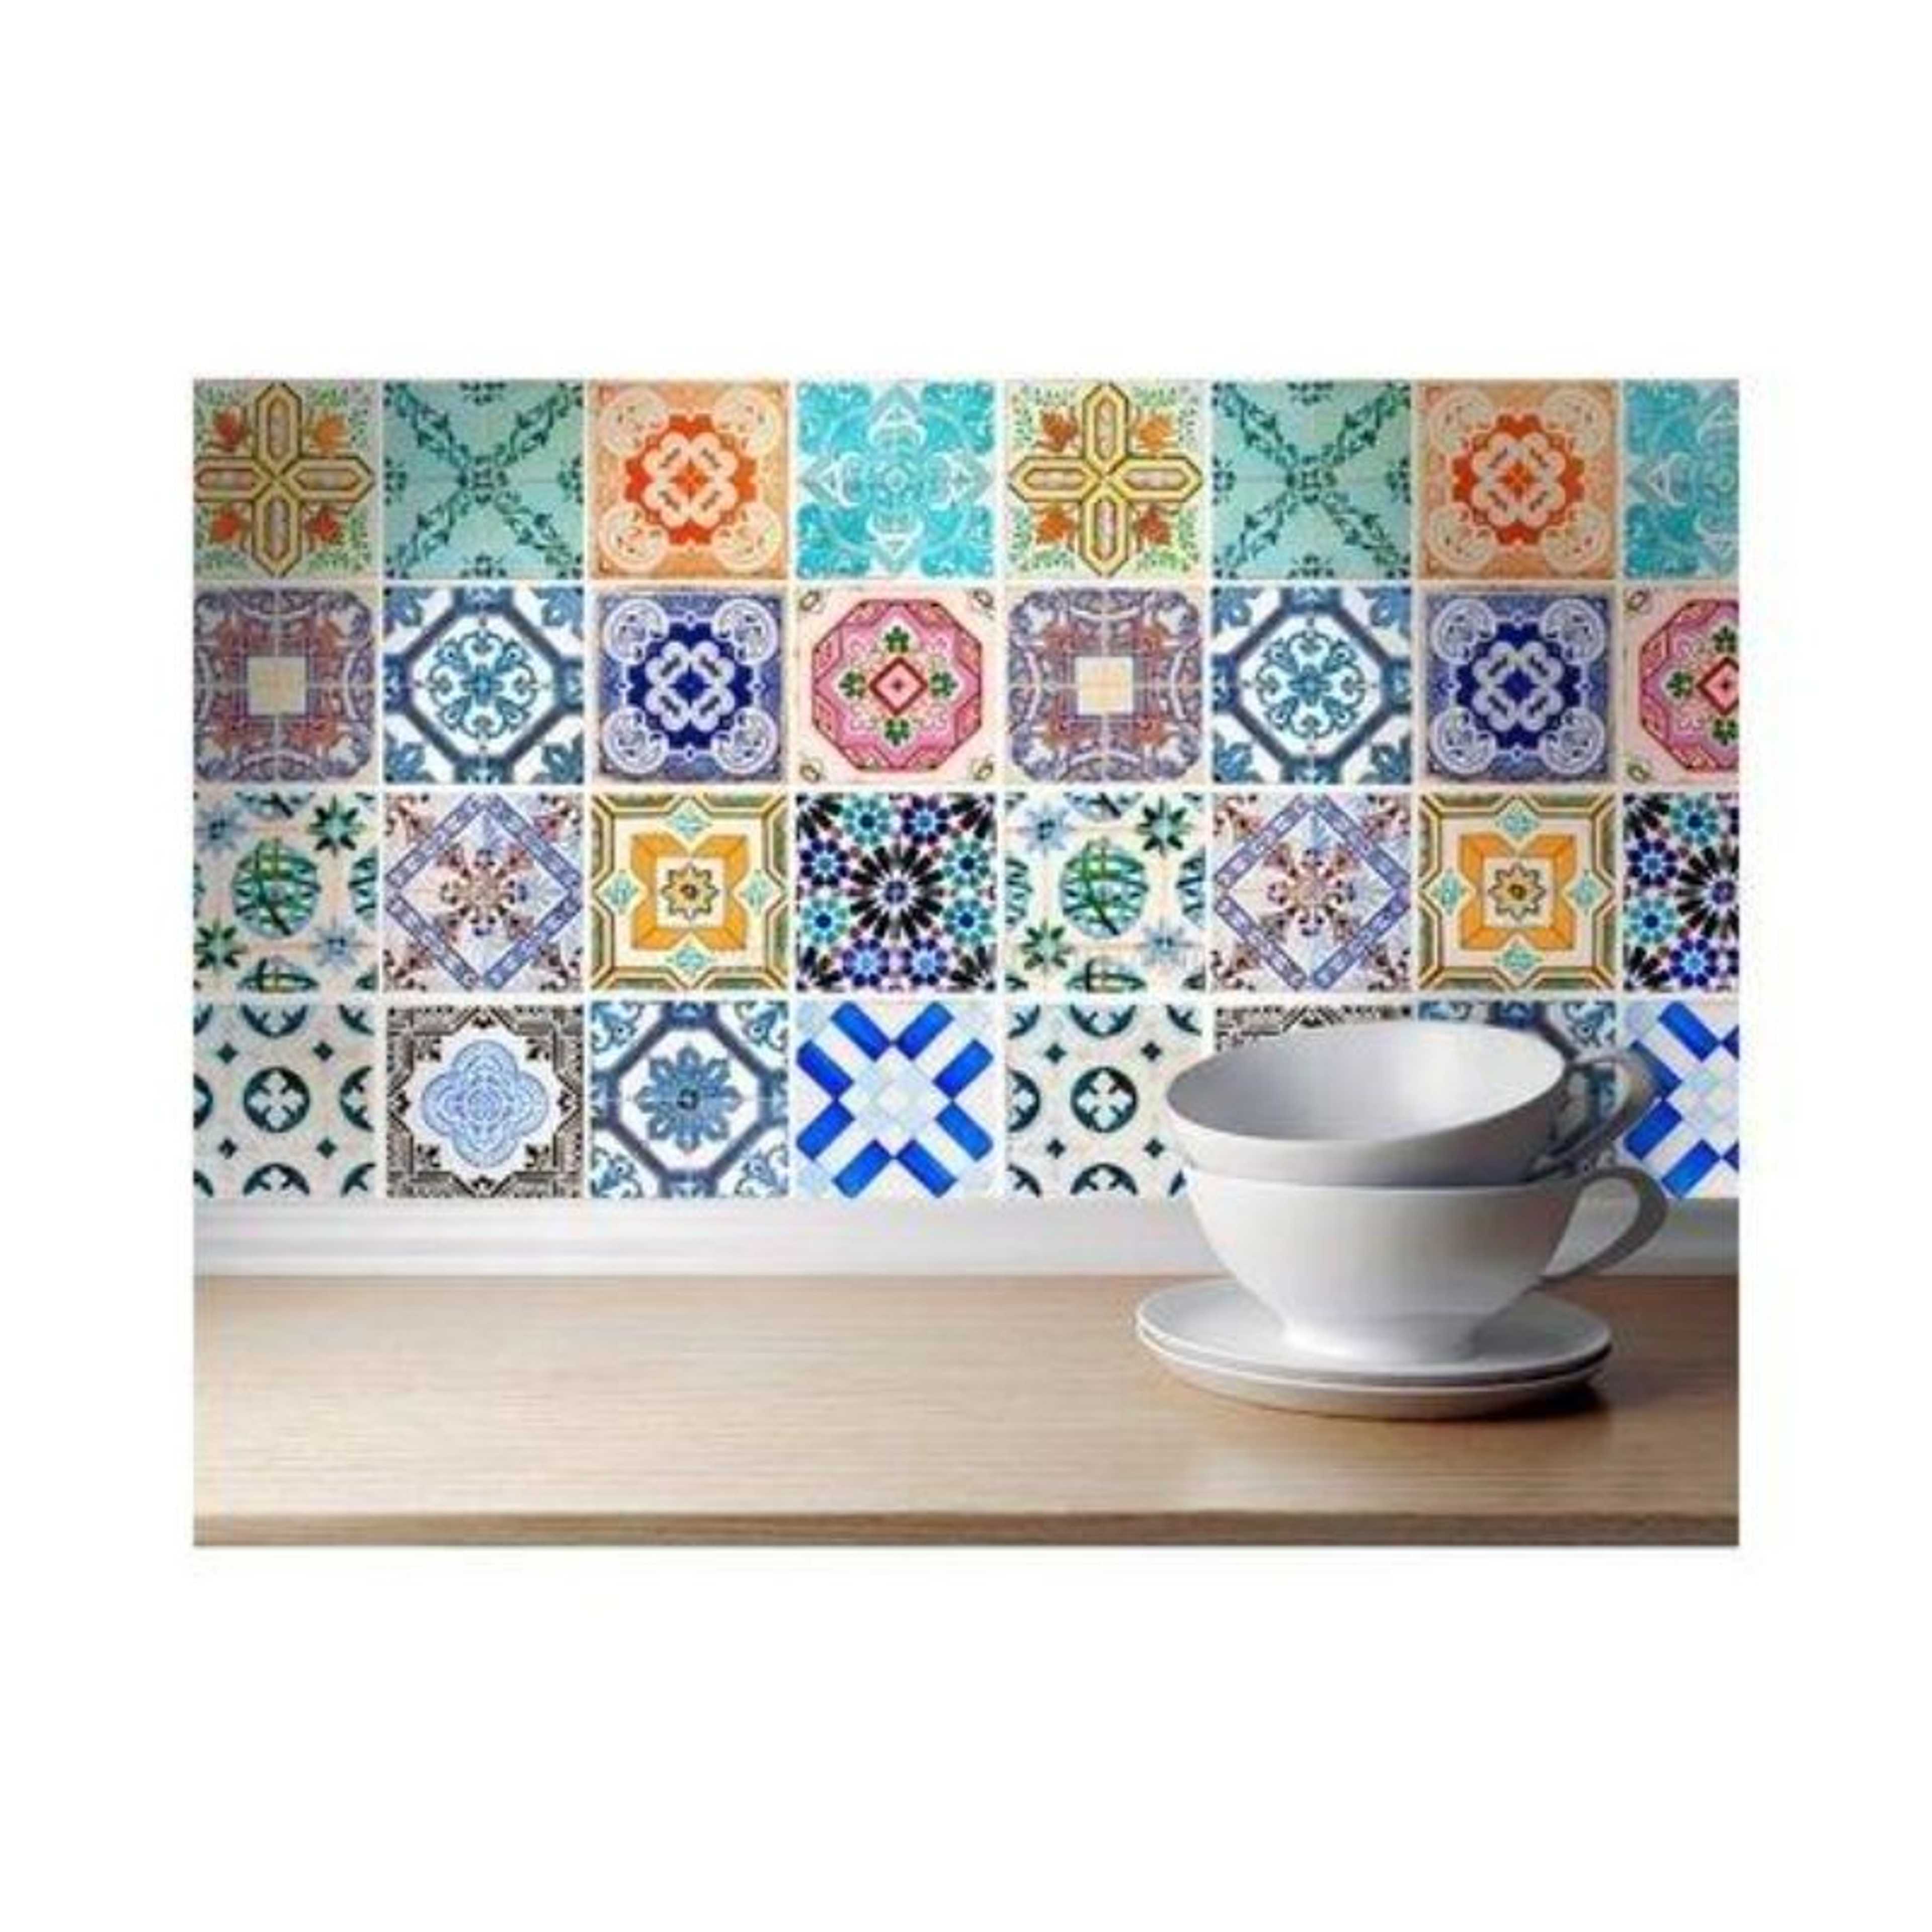 Pack Of 48 - Traditional Talavera Tiles Stickers For Bathroom & Kitchen - 6 X 6 Inches